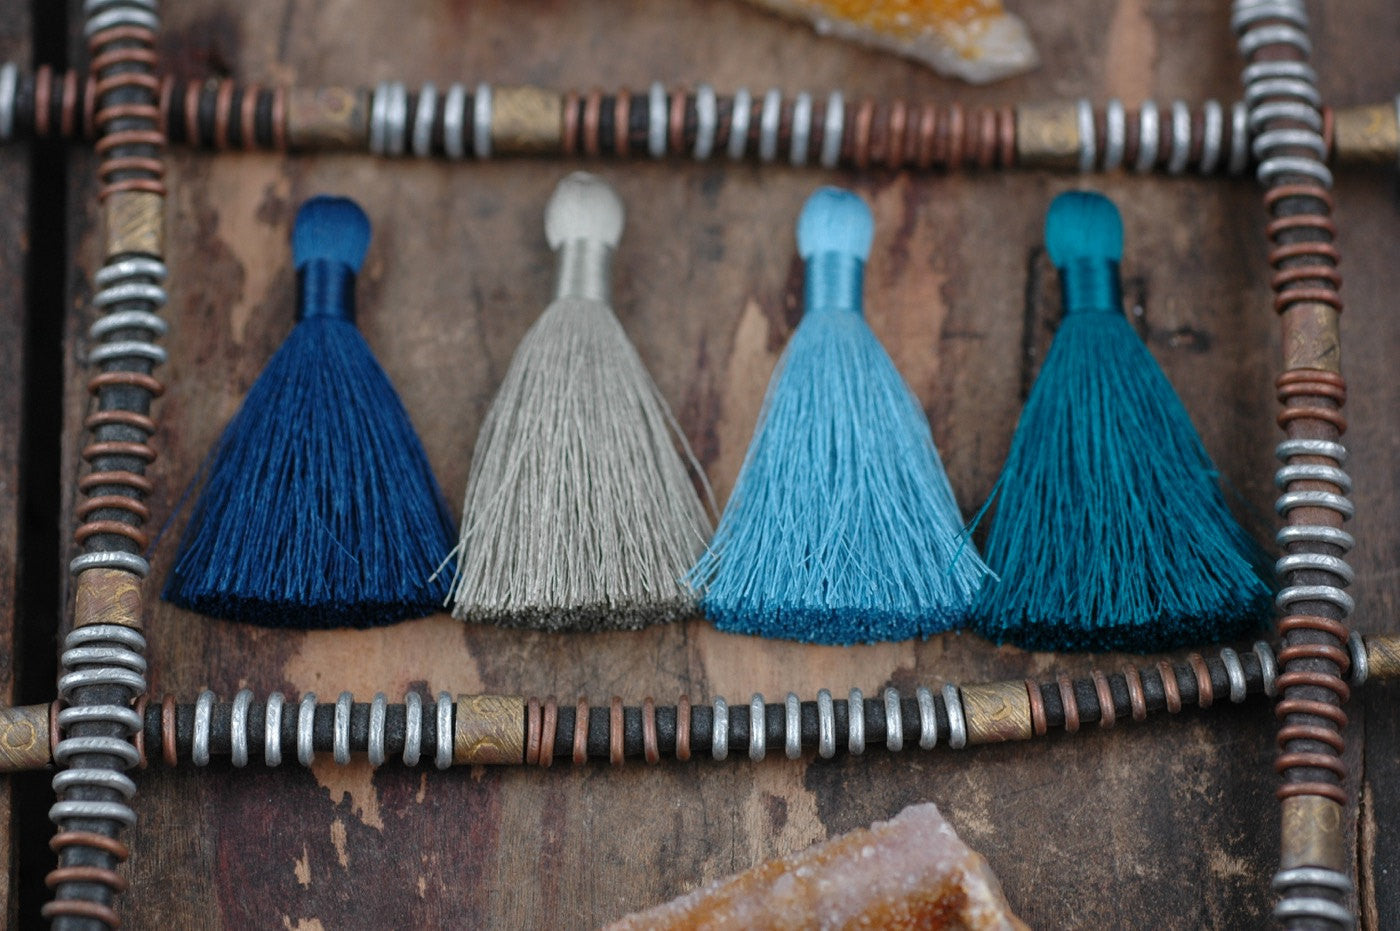 Tranquil Waters, 2" Silky Tassel Mixed Pack, 4 pieces - ShopWomanShopsWorld.com. Bone Beads, Tassels, Pom Poms, African Beads.